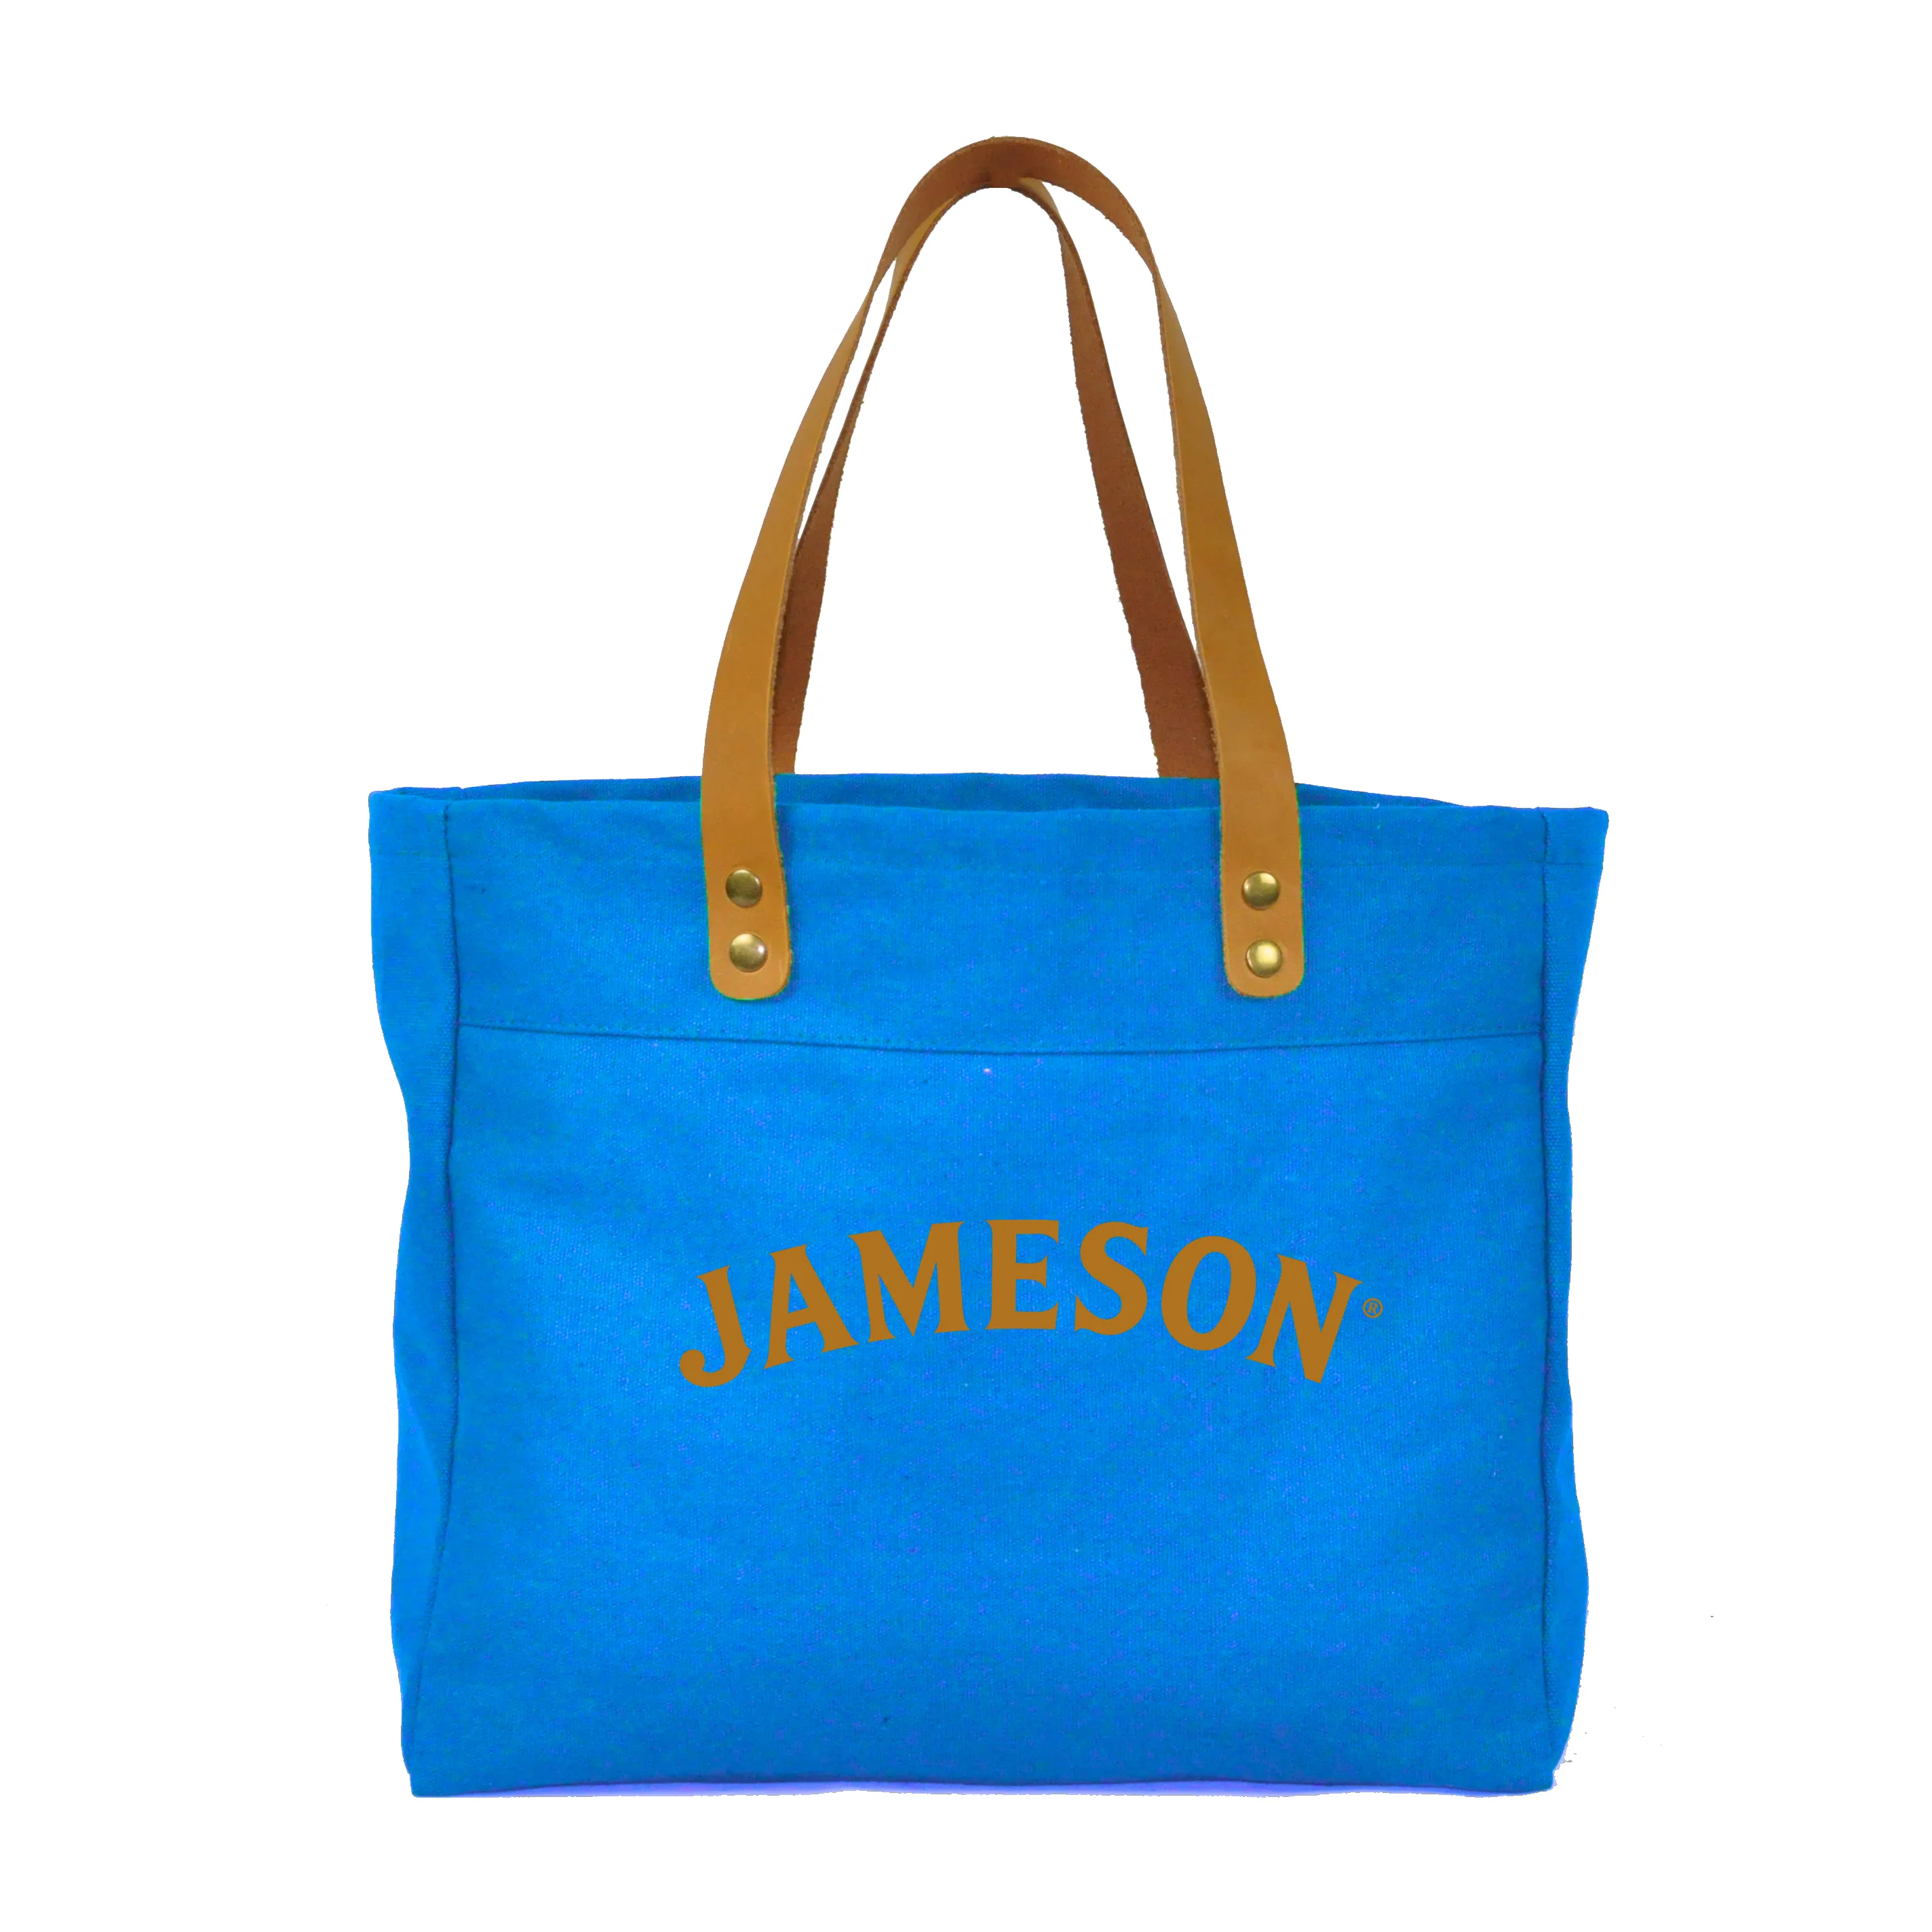 High Quality Promotional Shopping Bucket Weekend Canvas Tote Beach Bag With Leather Handles